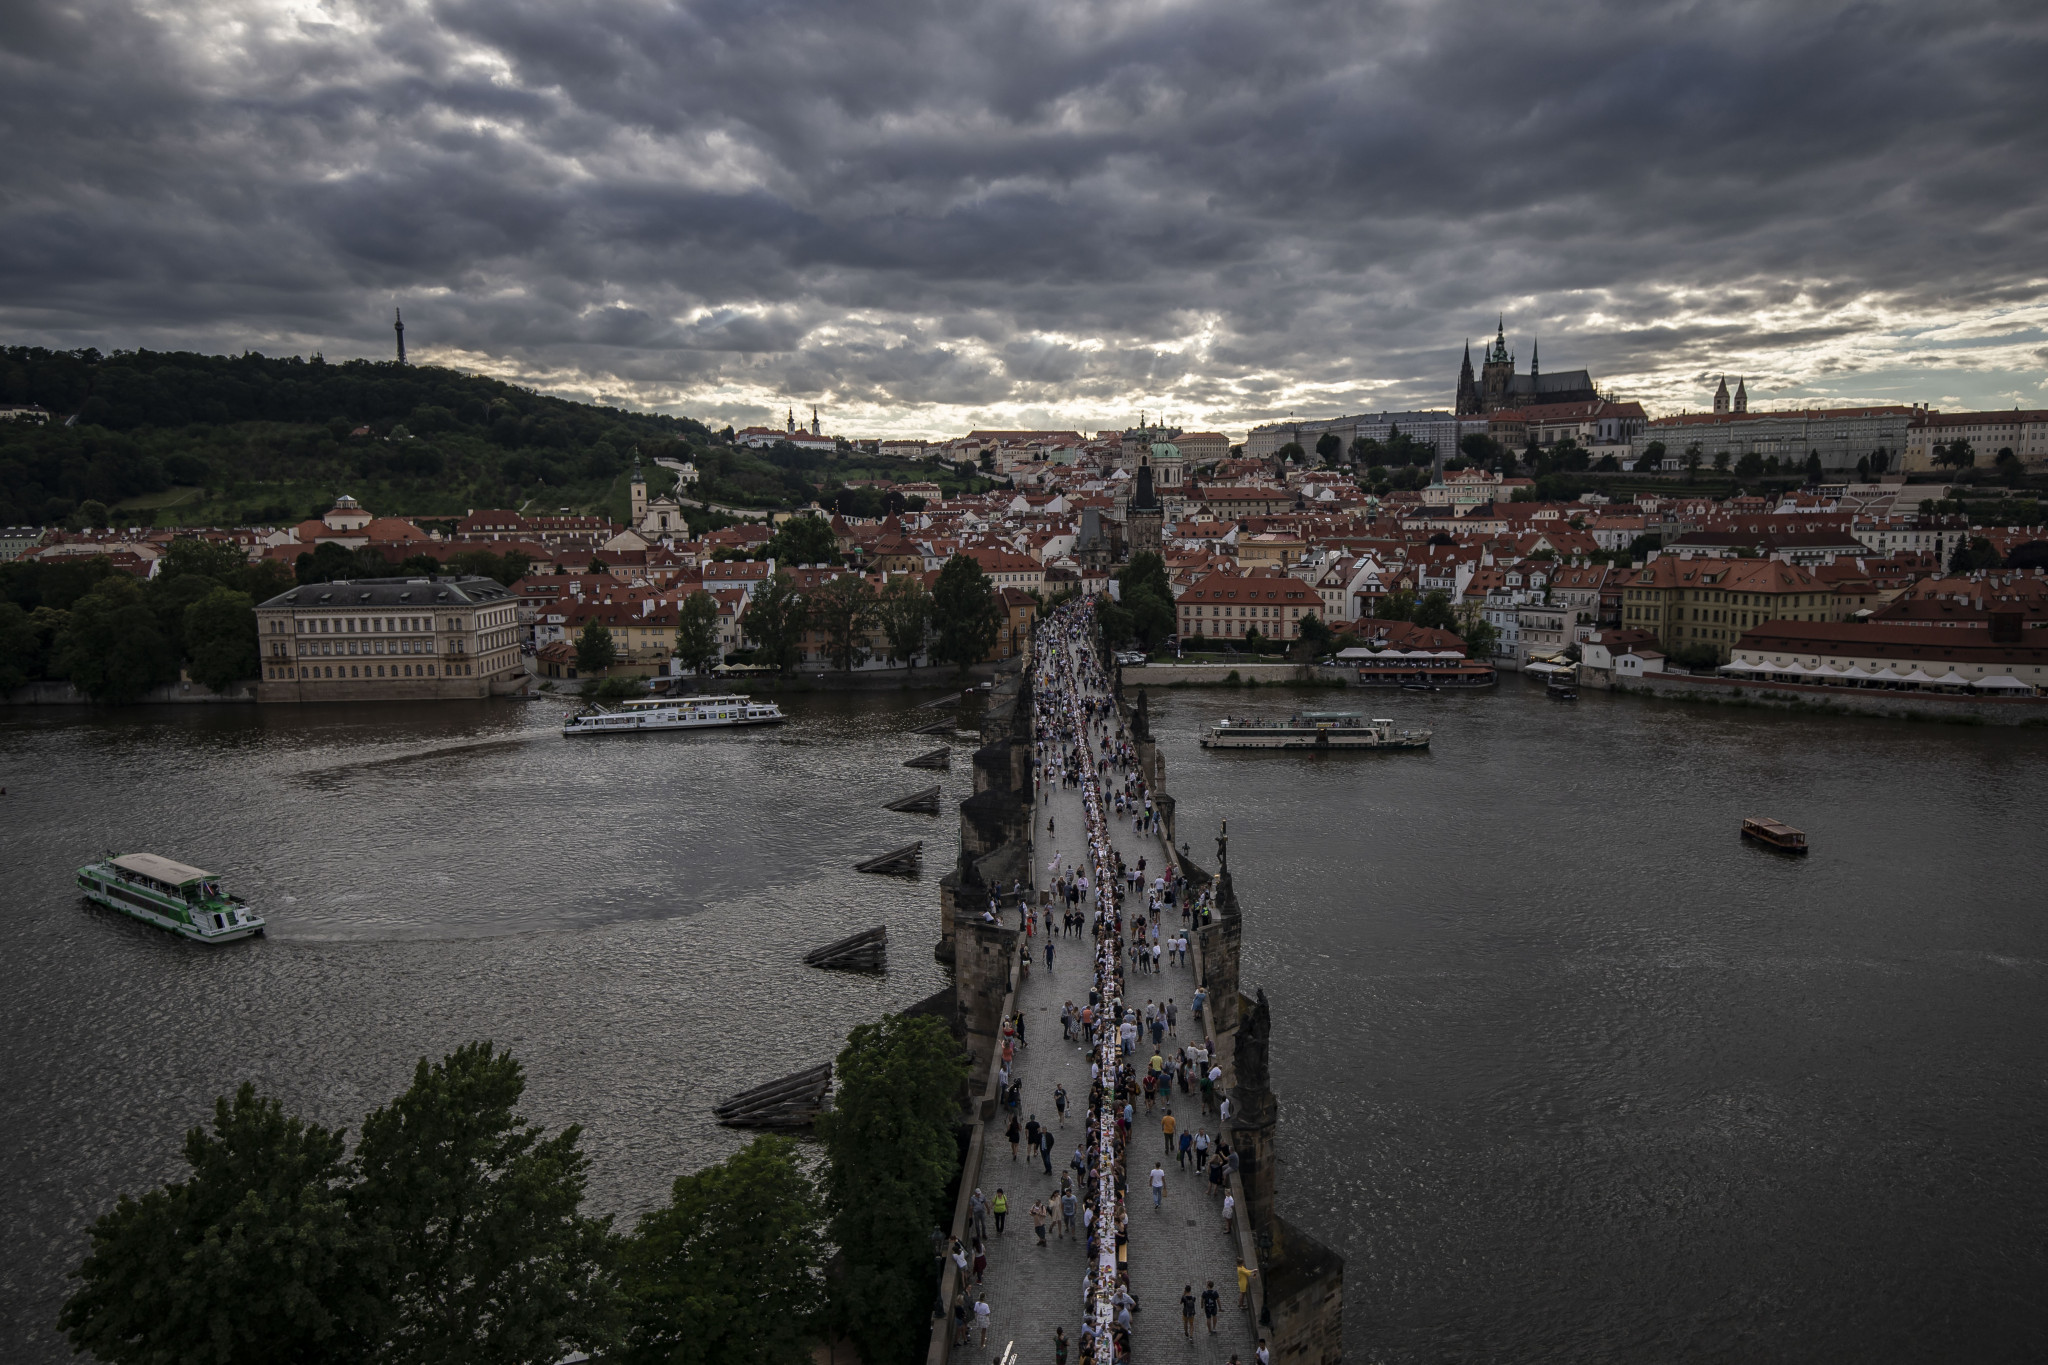 Prague will host the event ©Getty Images